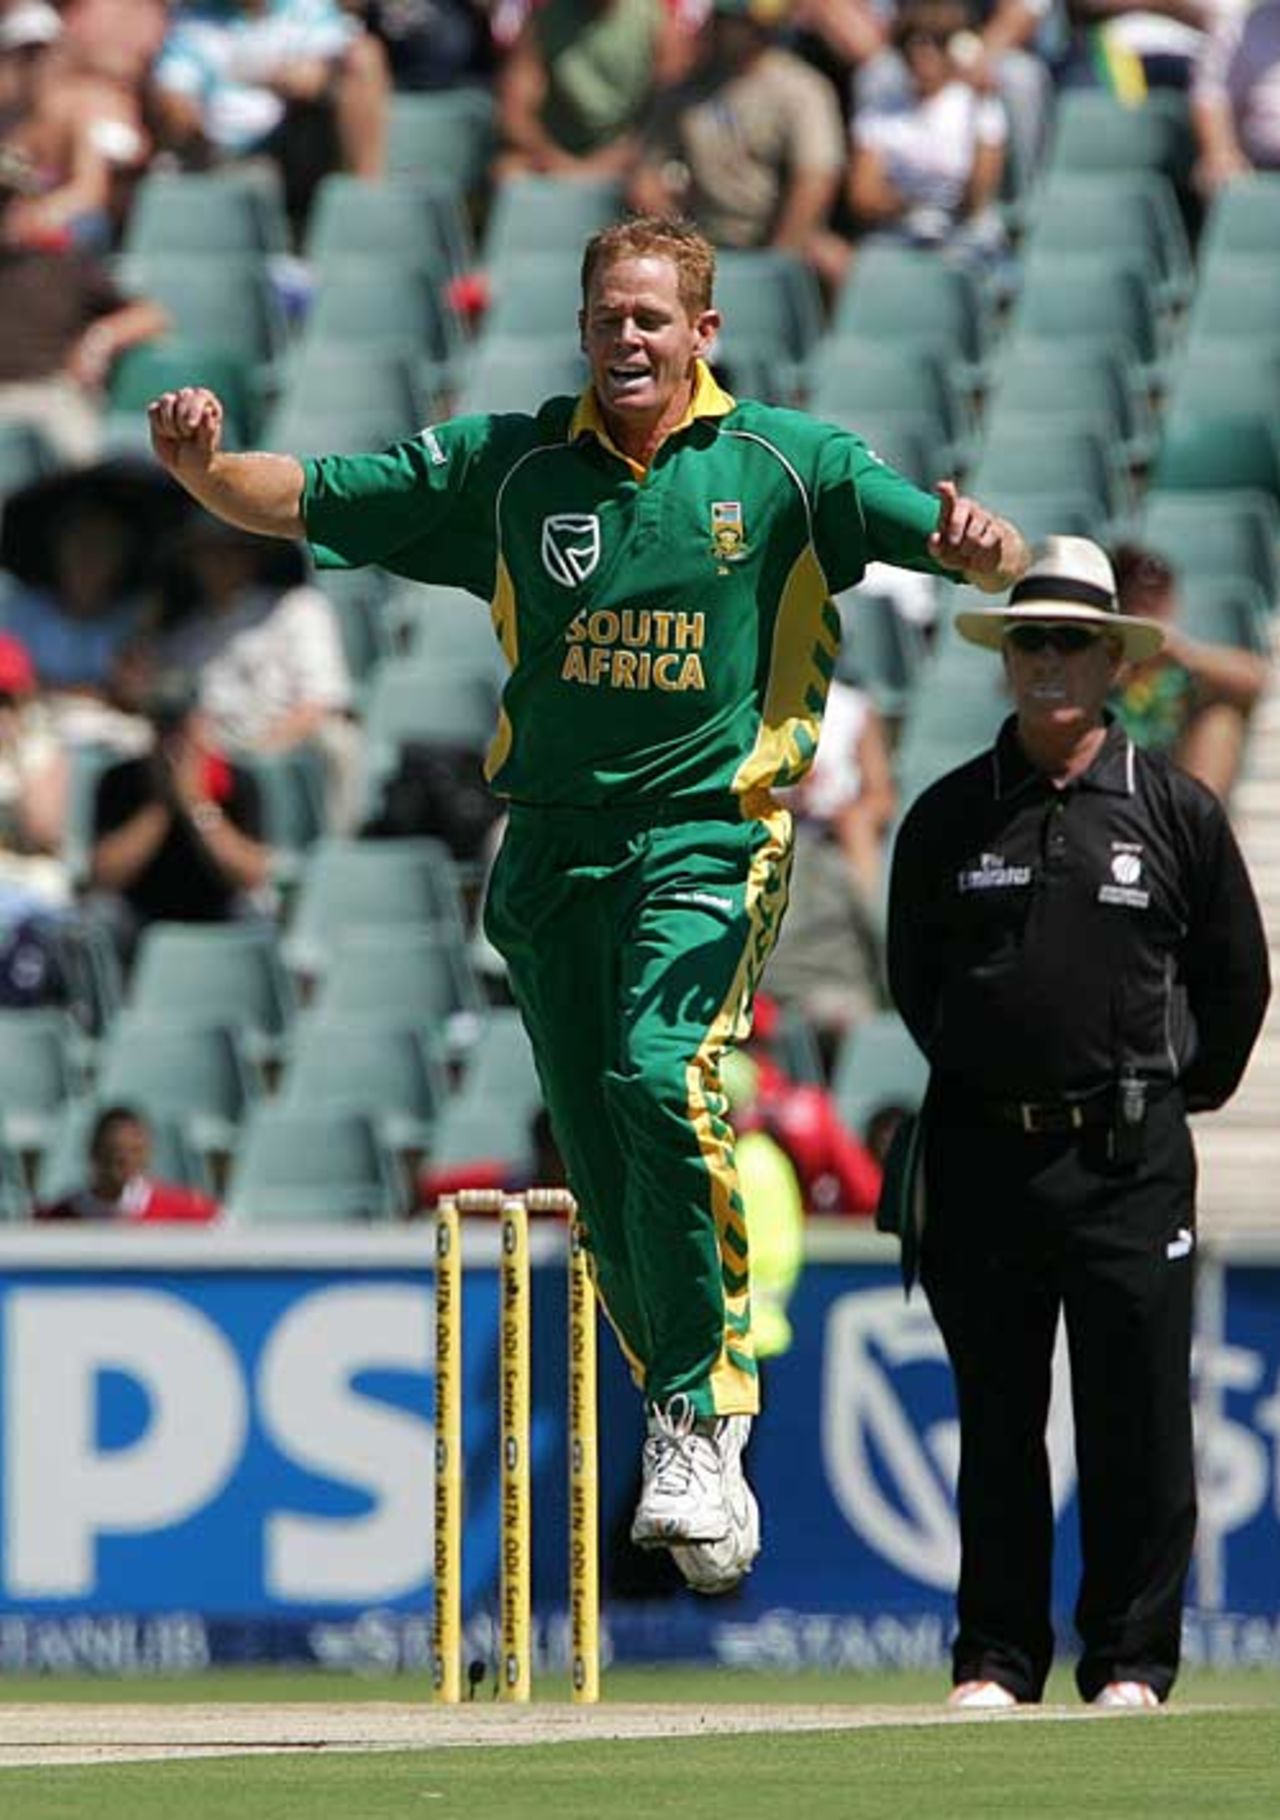 Shaun Pollock struck early and often for South Africa on his way to 5 for 22, South Africa v Pakistan, 5th ODI, Johannesburg, February 14, 2007